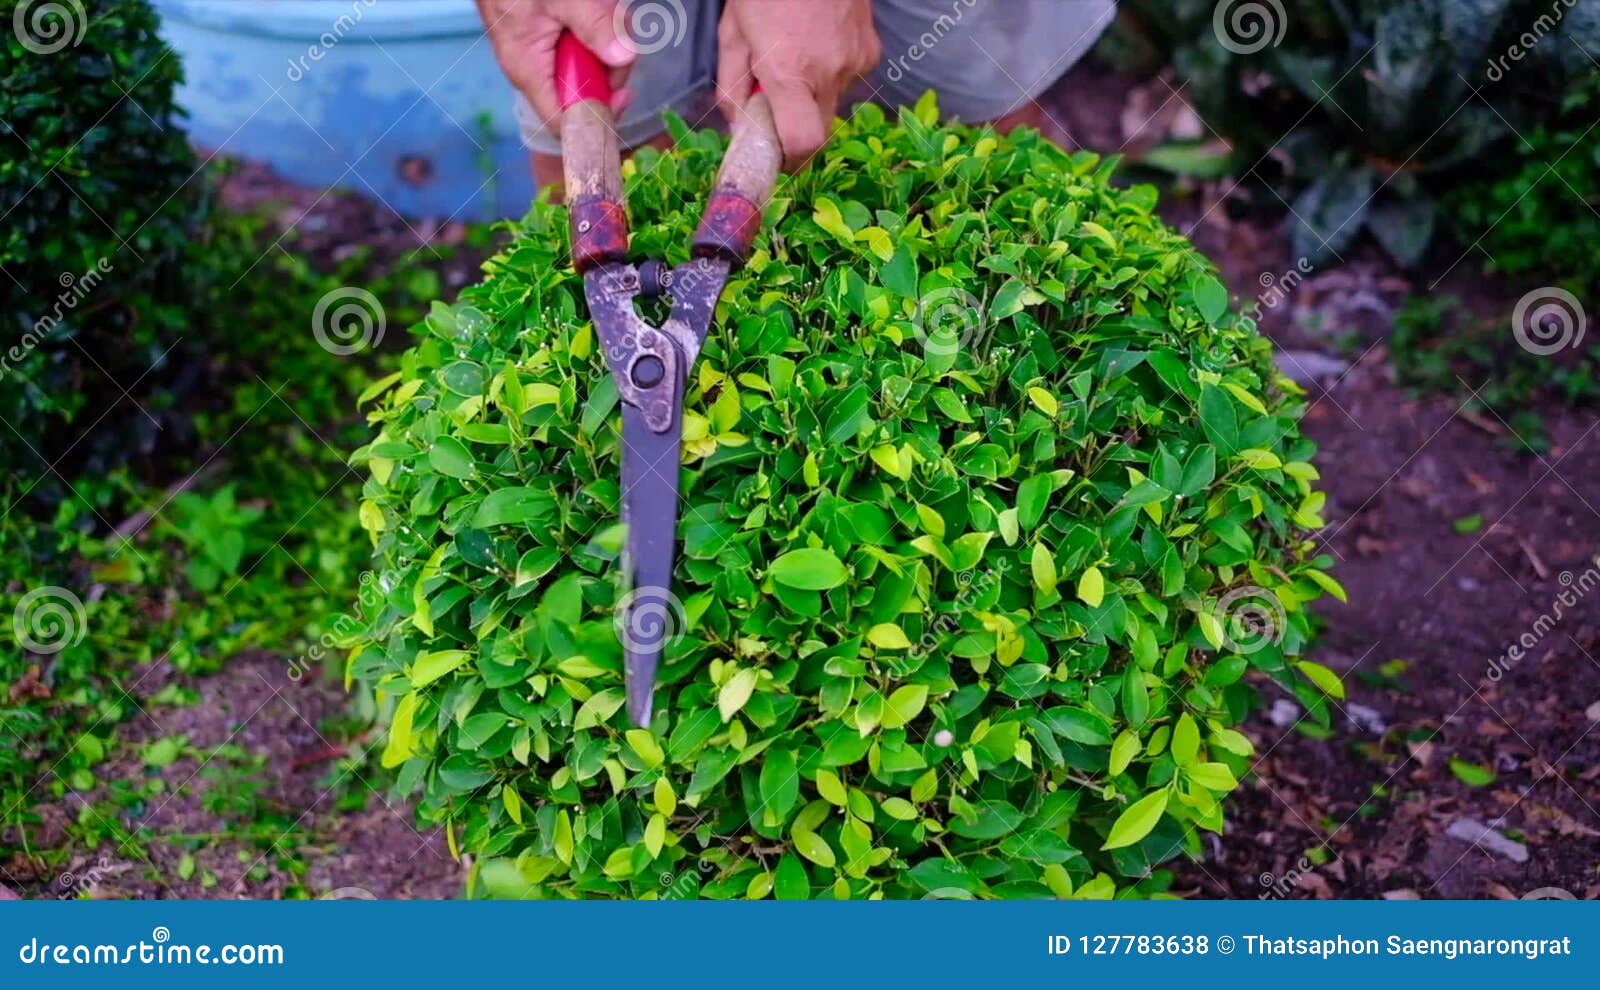 Hand Of Gardener Used Garden Shears To Trimming And Cutting A